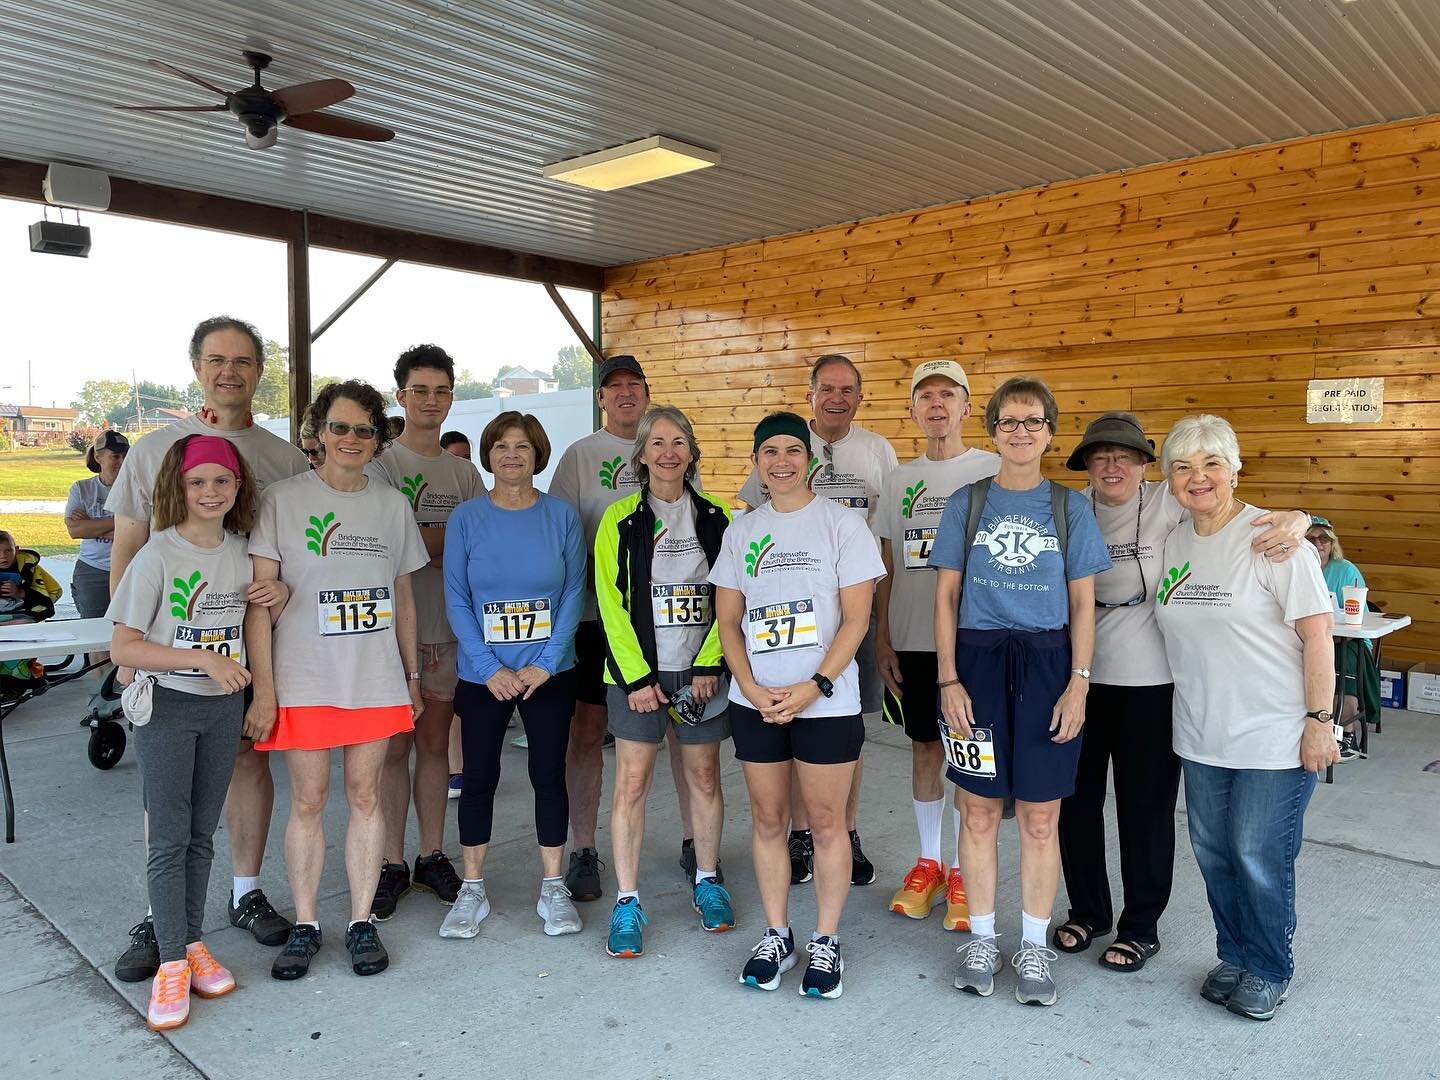 Our BCOB runners and walkers at the Race to the Bottom 5k this morning! We all wanna be them when we grow up. ❤️Remember to stop by our booth at Oakdale Park later today to buy some yummy chicken and support the renovations to our Refugee Resettlemen